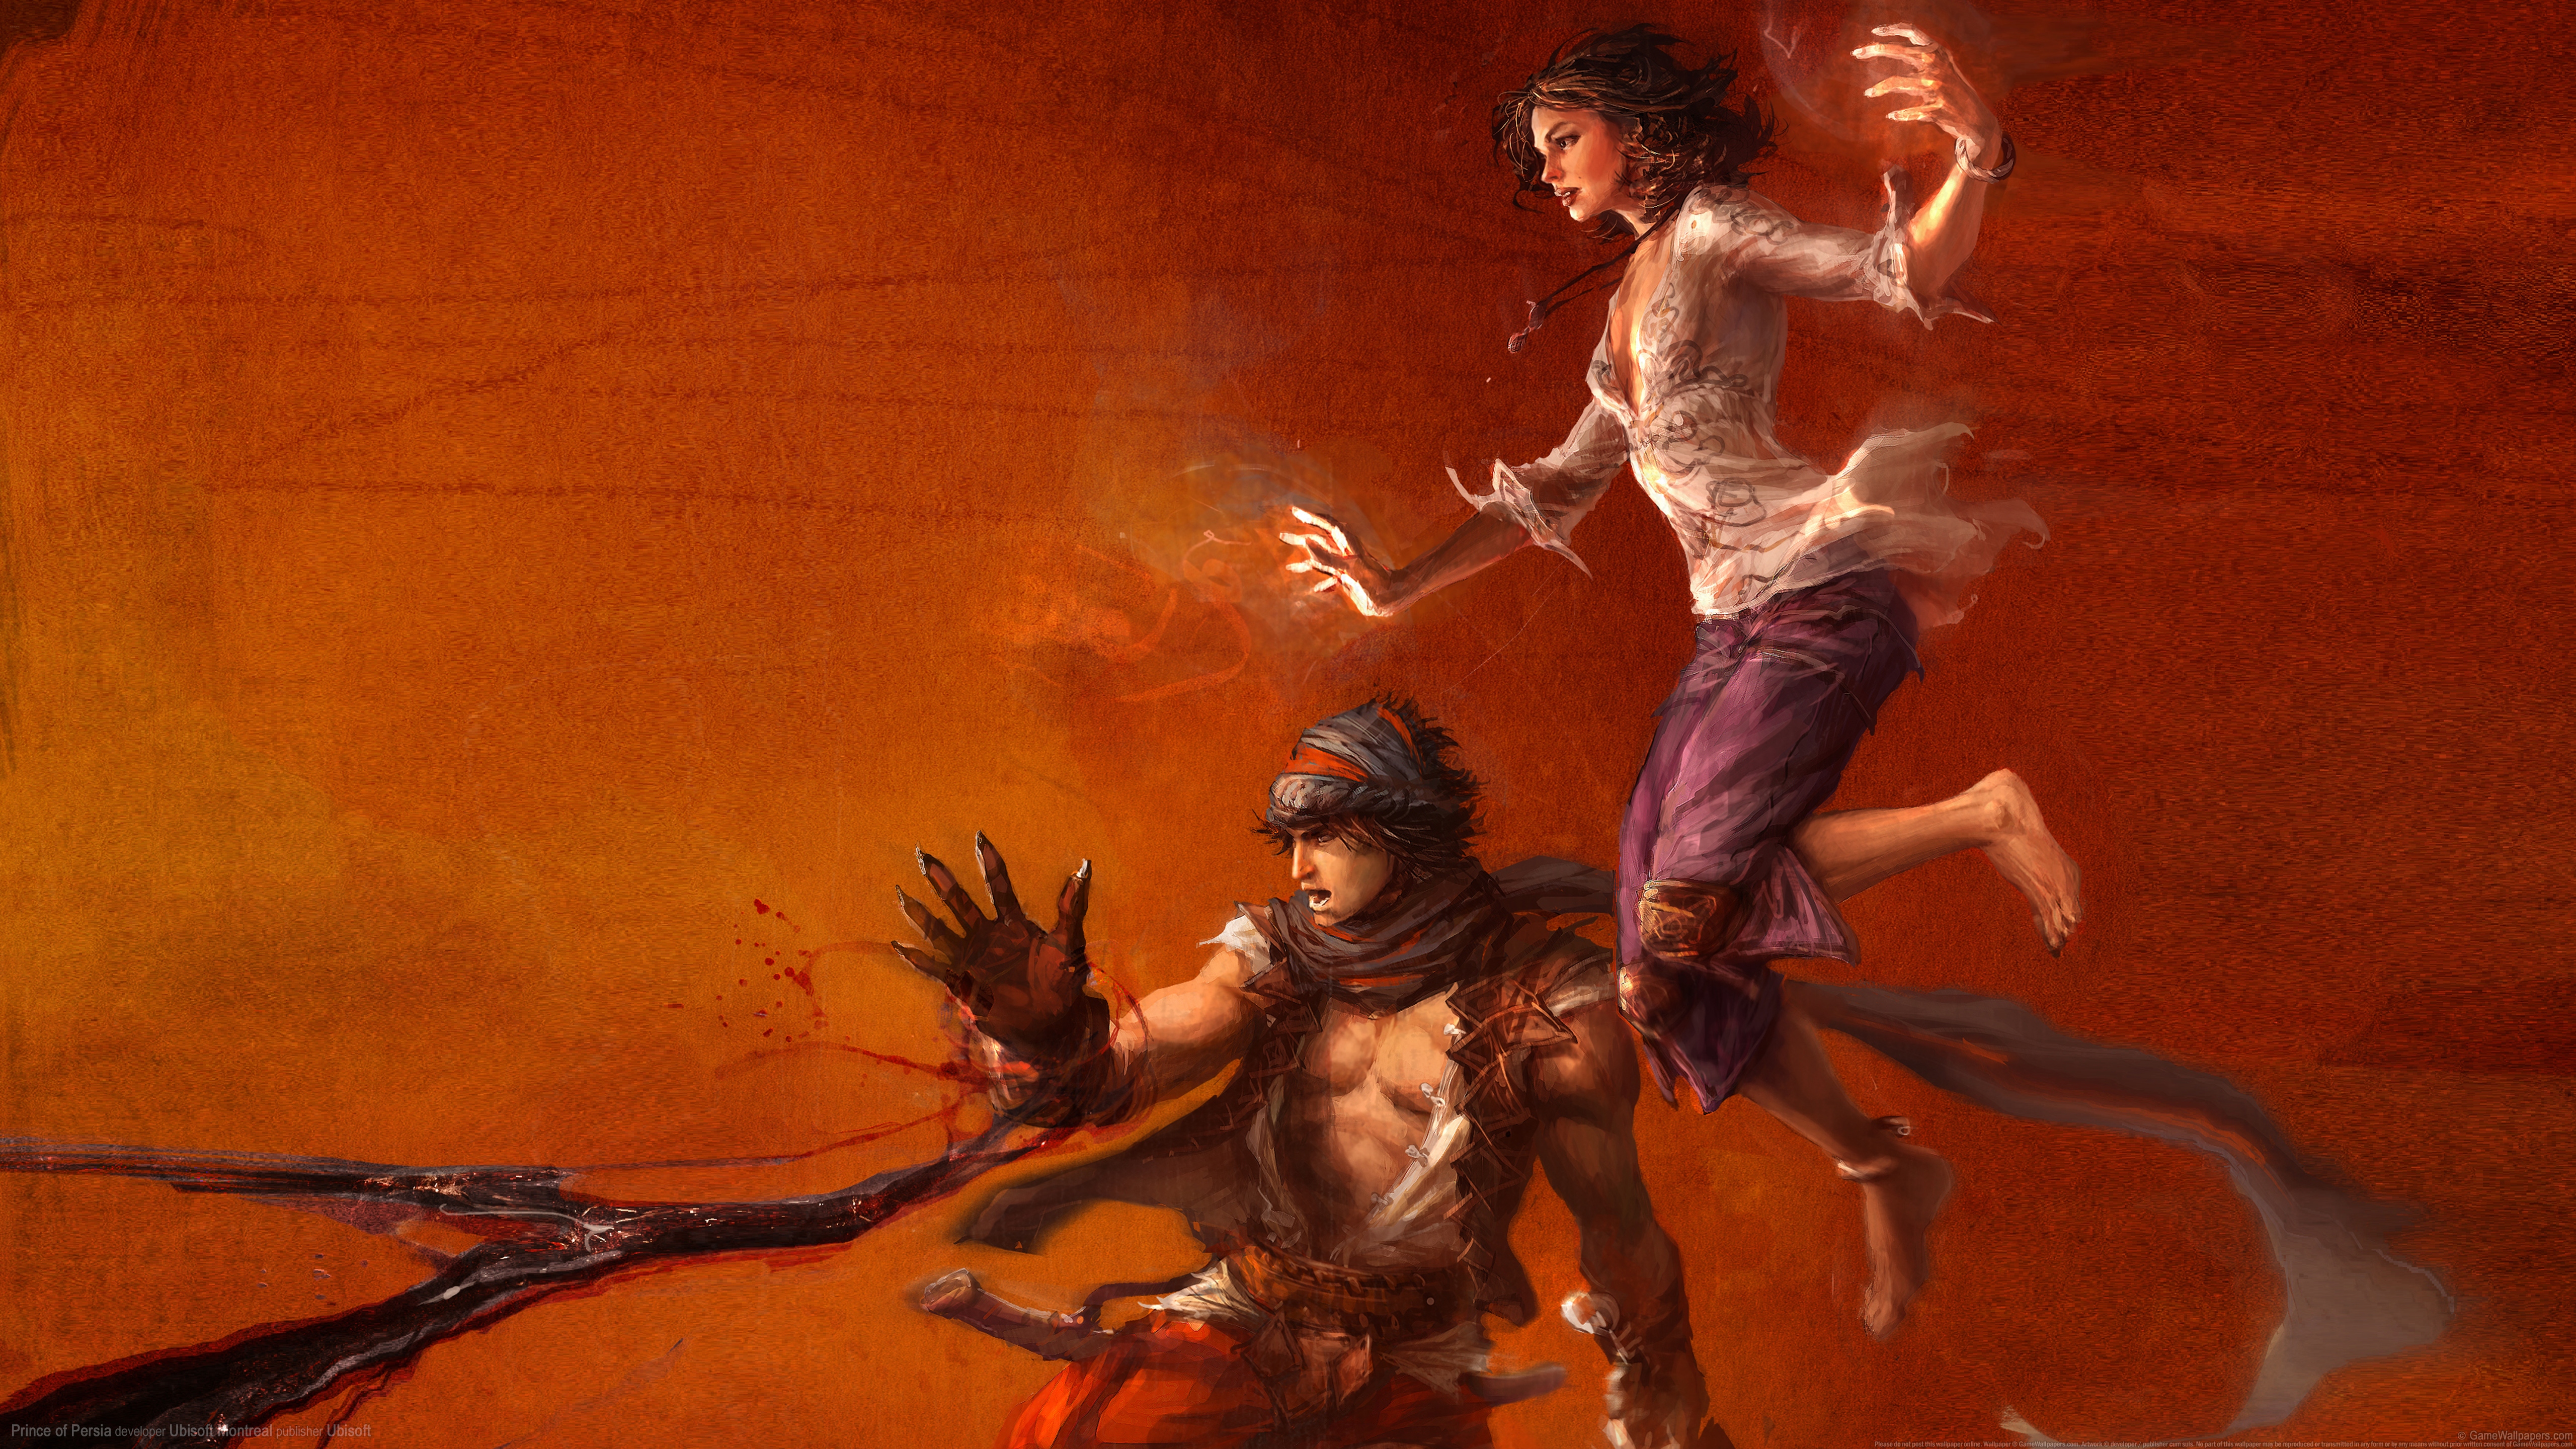 Prince of Persia 5120x2880 wallpaper or background 07